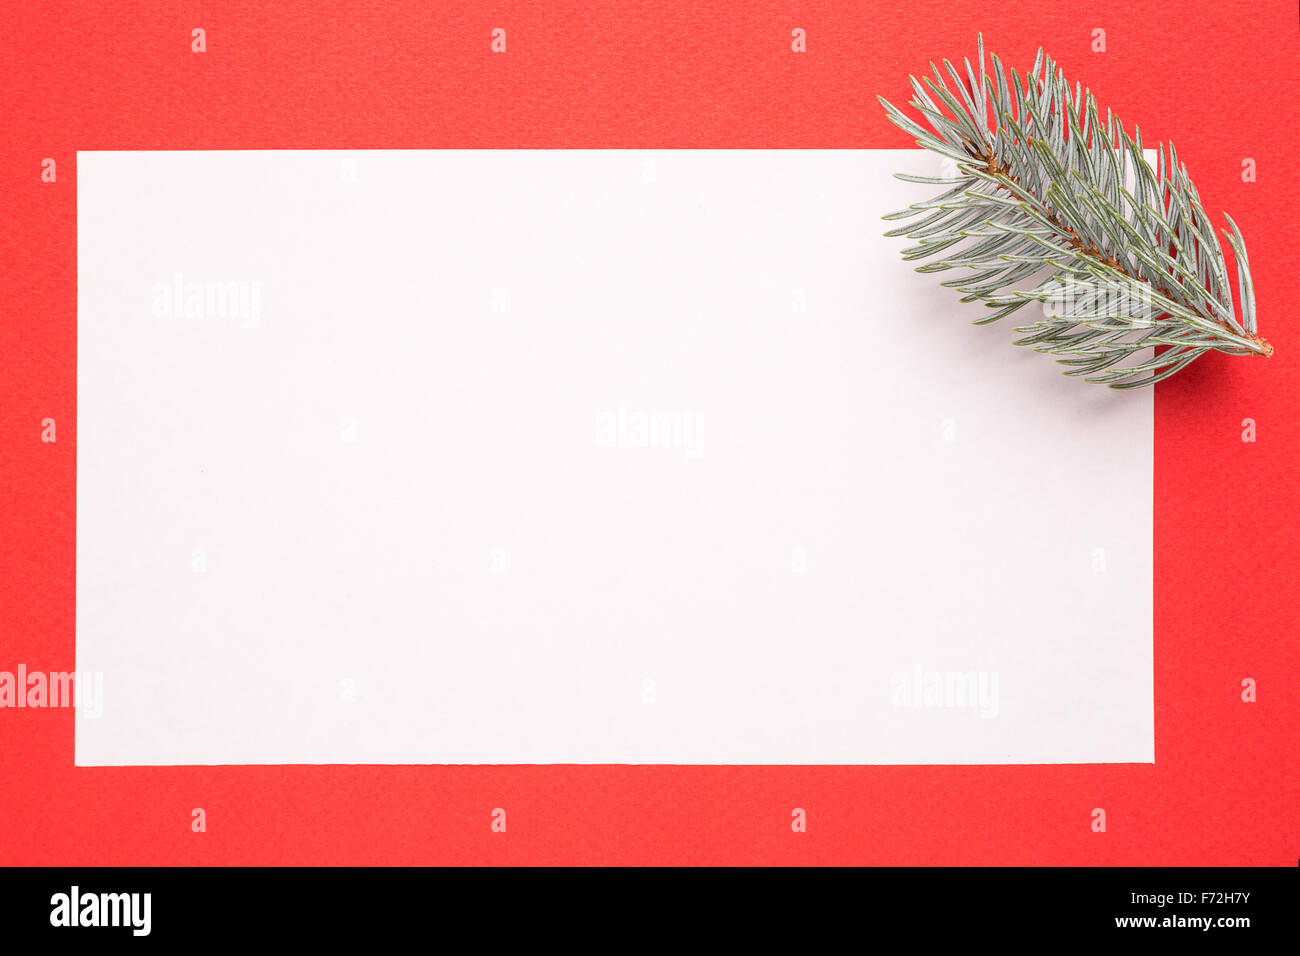 Blank Christmas card or invitation with fir on red background Stock Photo